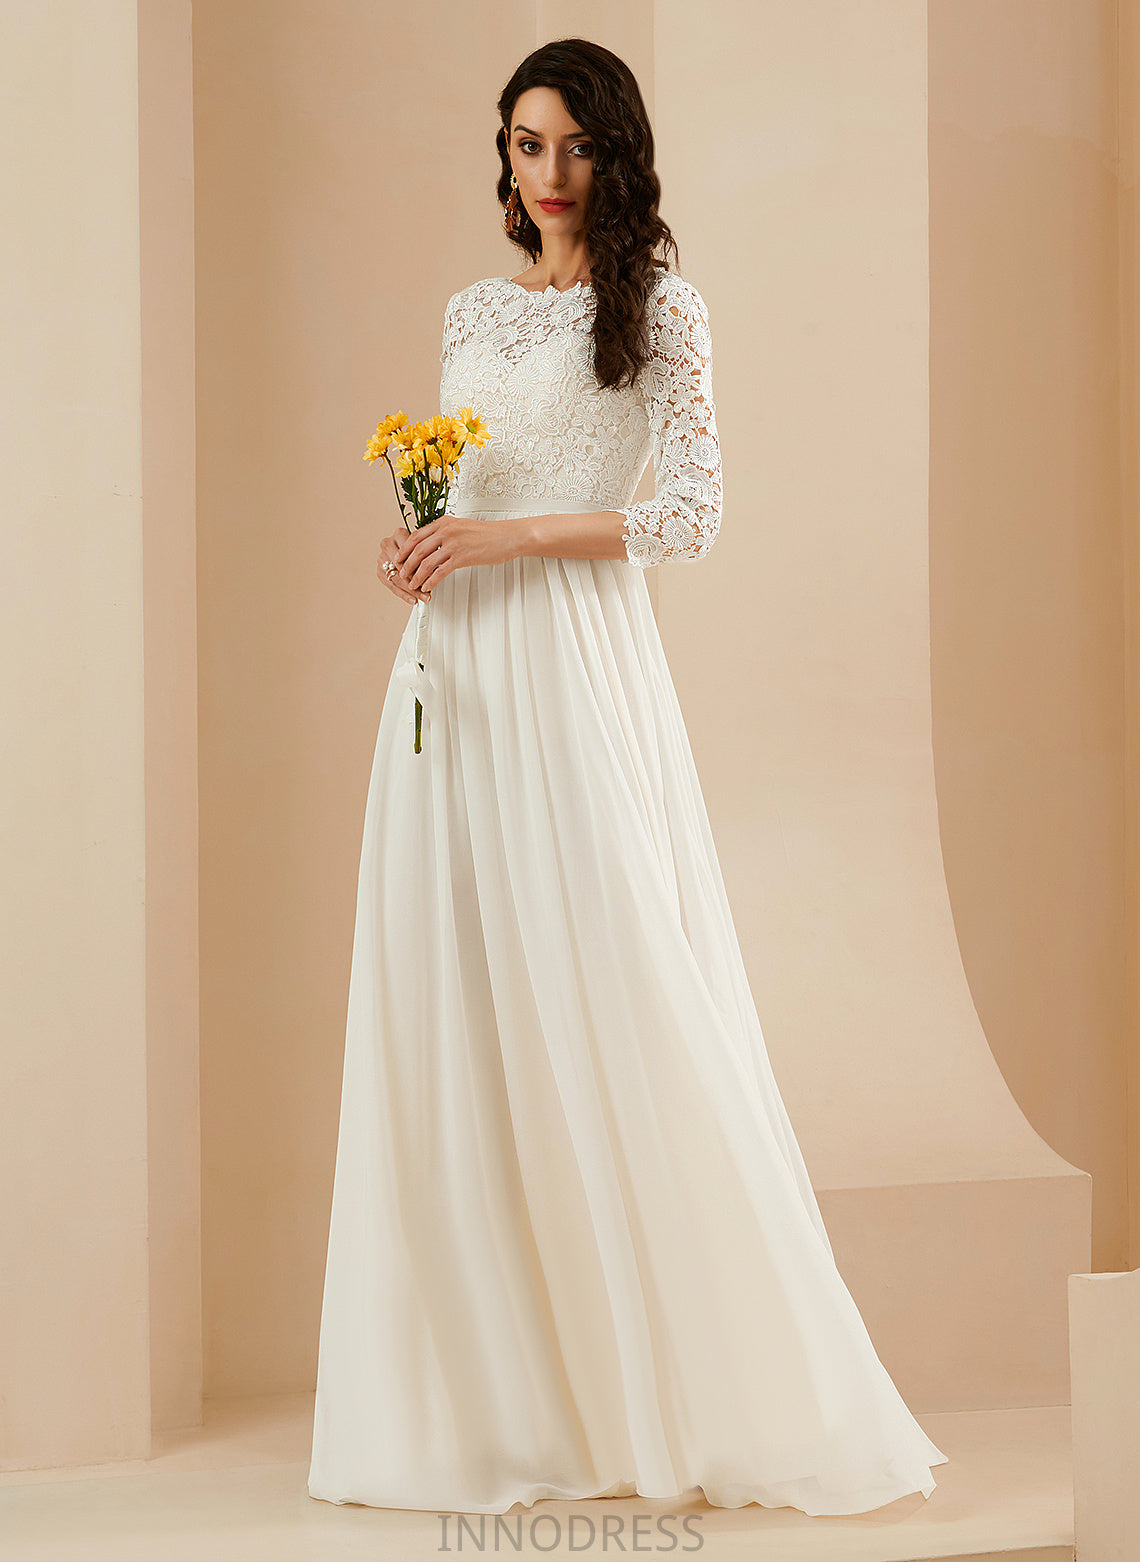 Chiffon Lace Wedding Dresses With Train Dress Neck Sweep Phoebe Scoop Wedding A-Line